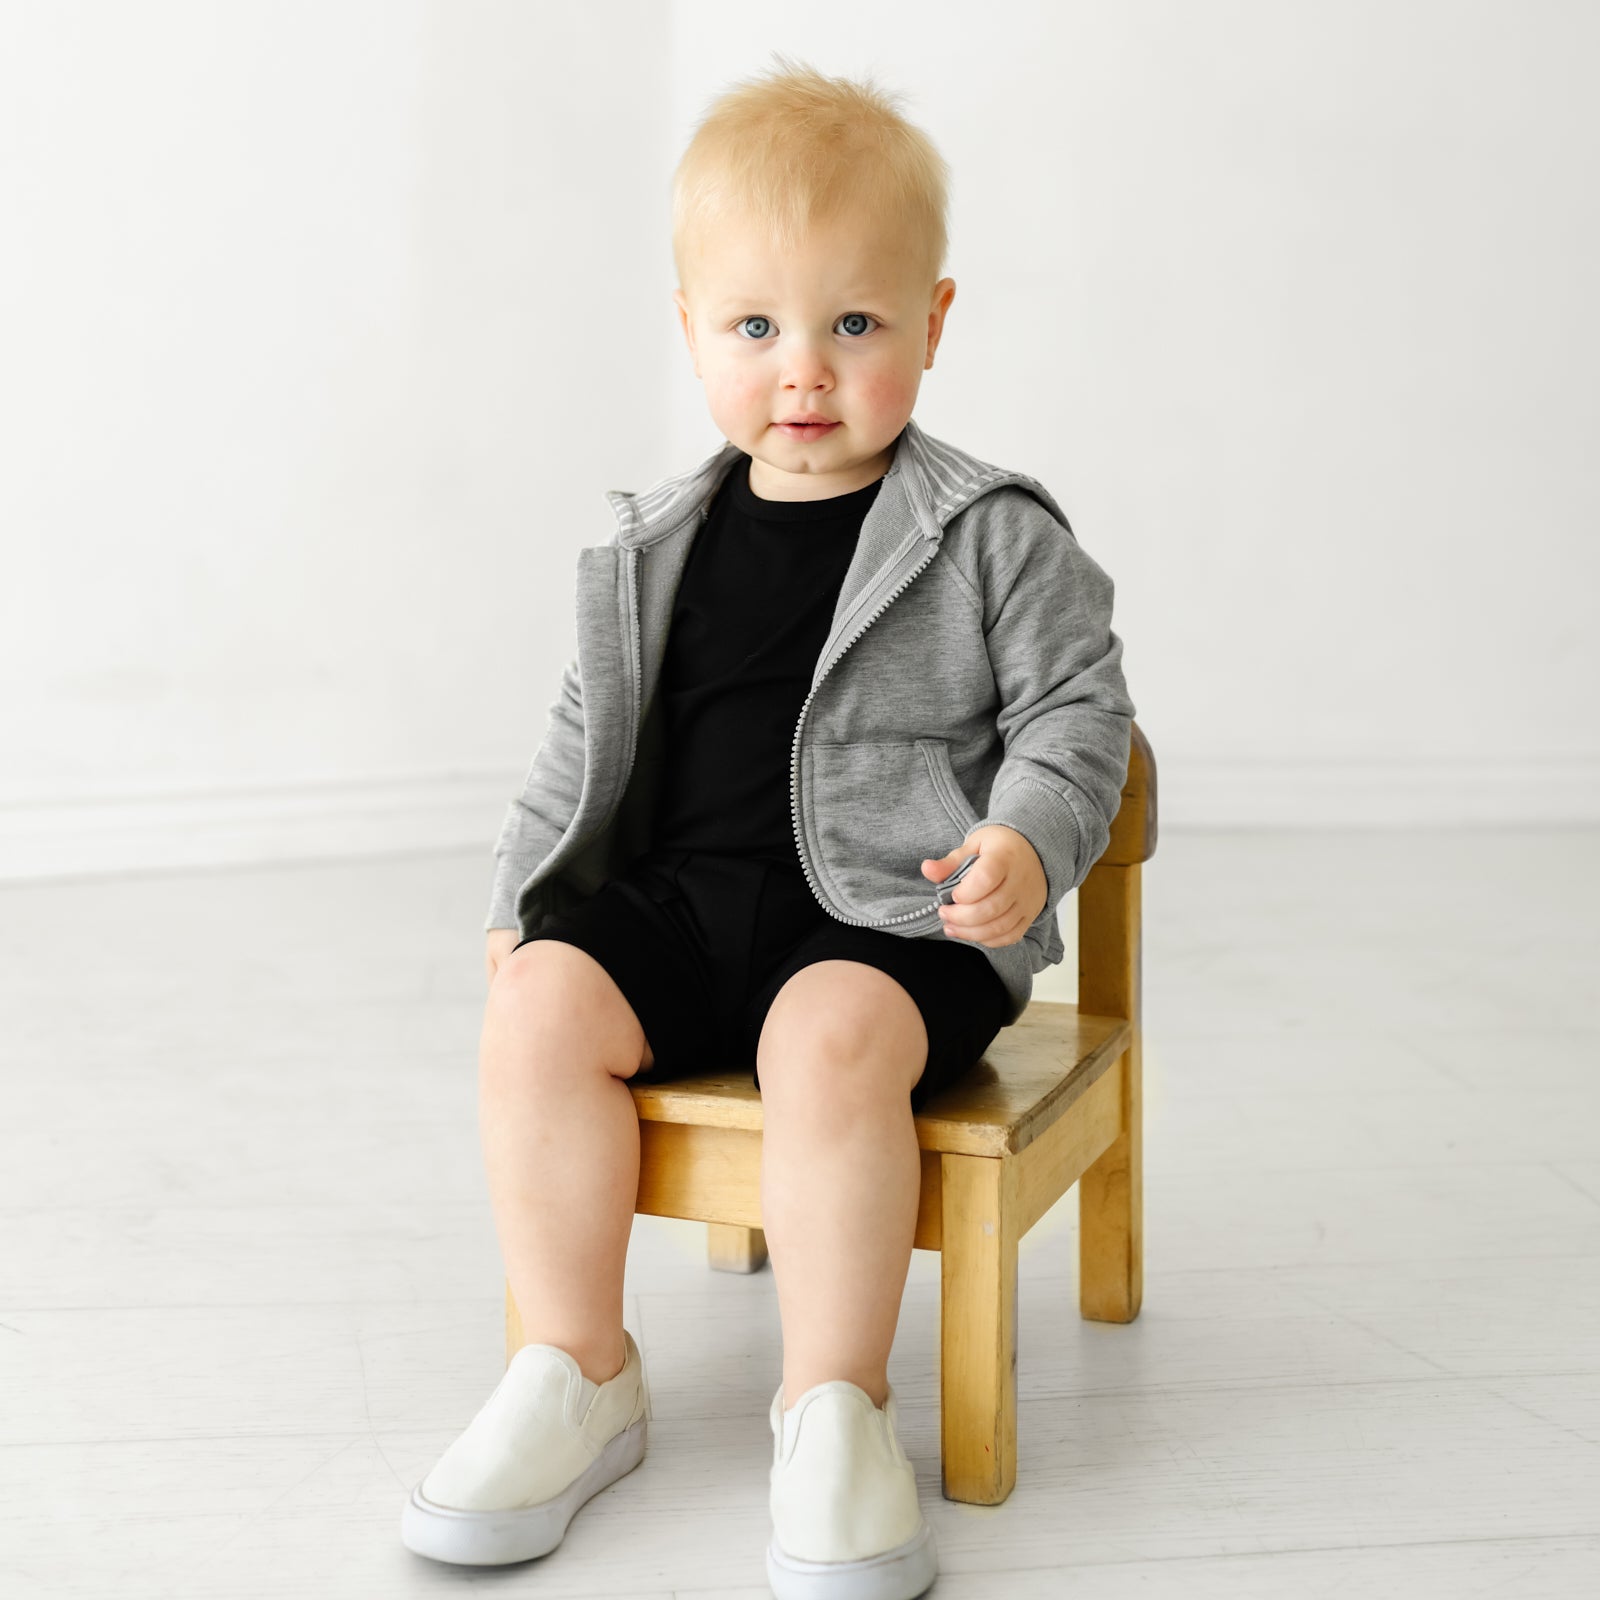 Child sitting on a chair wearing Black shorts and coordinating Play top and zip hoodie